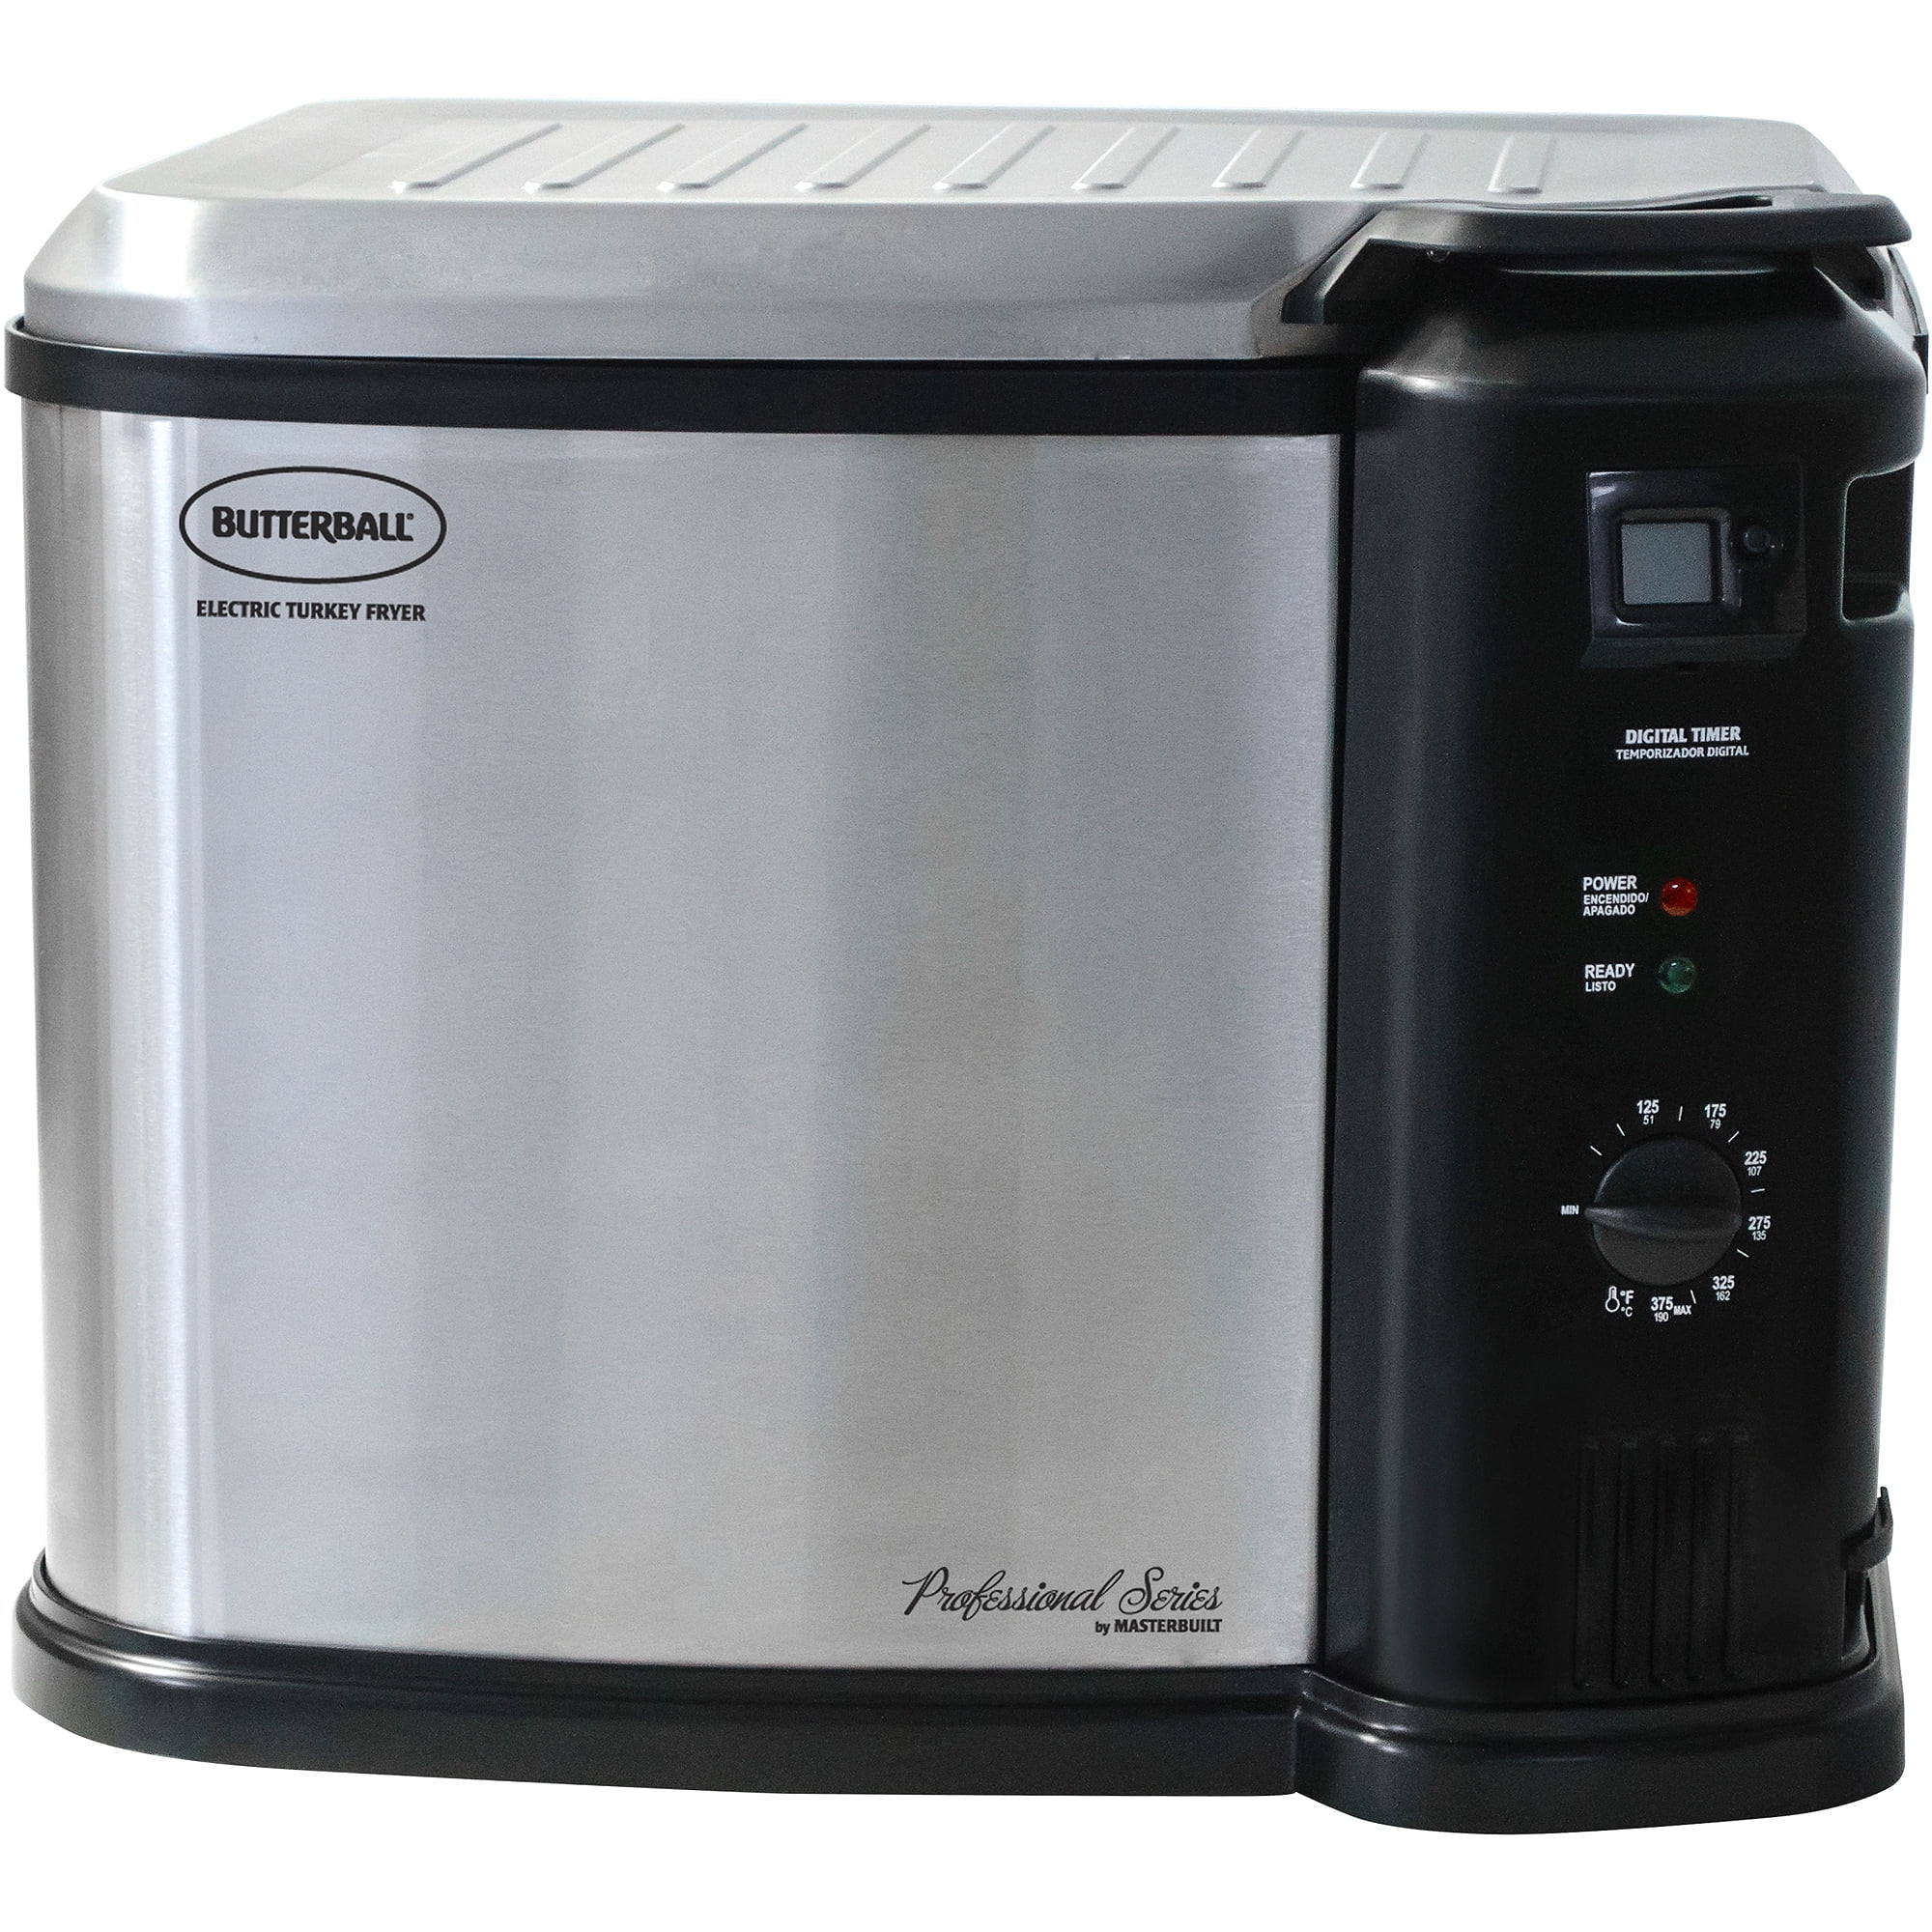 Butterball Xl Electric Fryer Stainless Steel 2015 Model